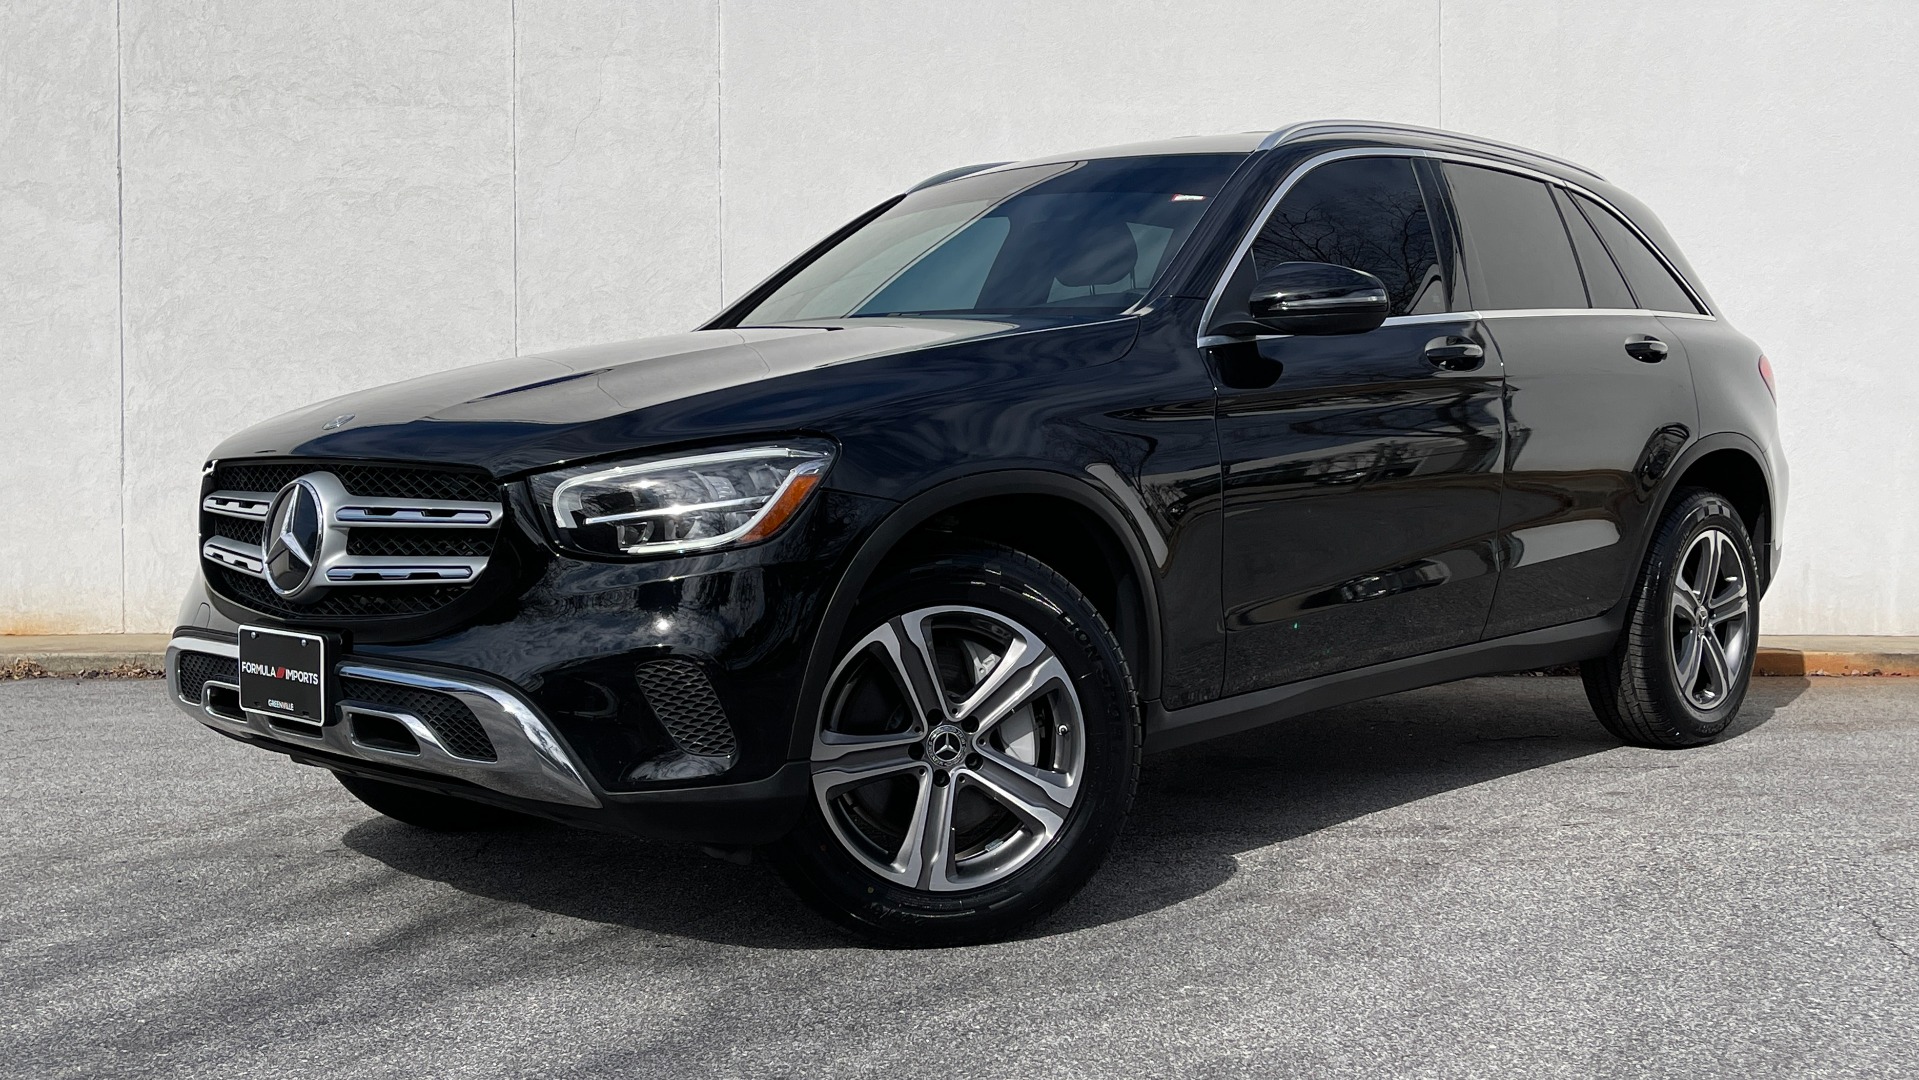 Used 2020 Mercedes-Benz GLC GLC 300 / AWD / 18IN WHEELS / LEATHER / WOOD TRIM for sale $41,995 at Formula Imports in Charlotte NC 28227 1